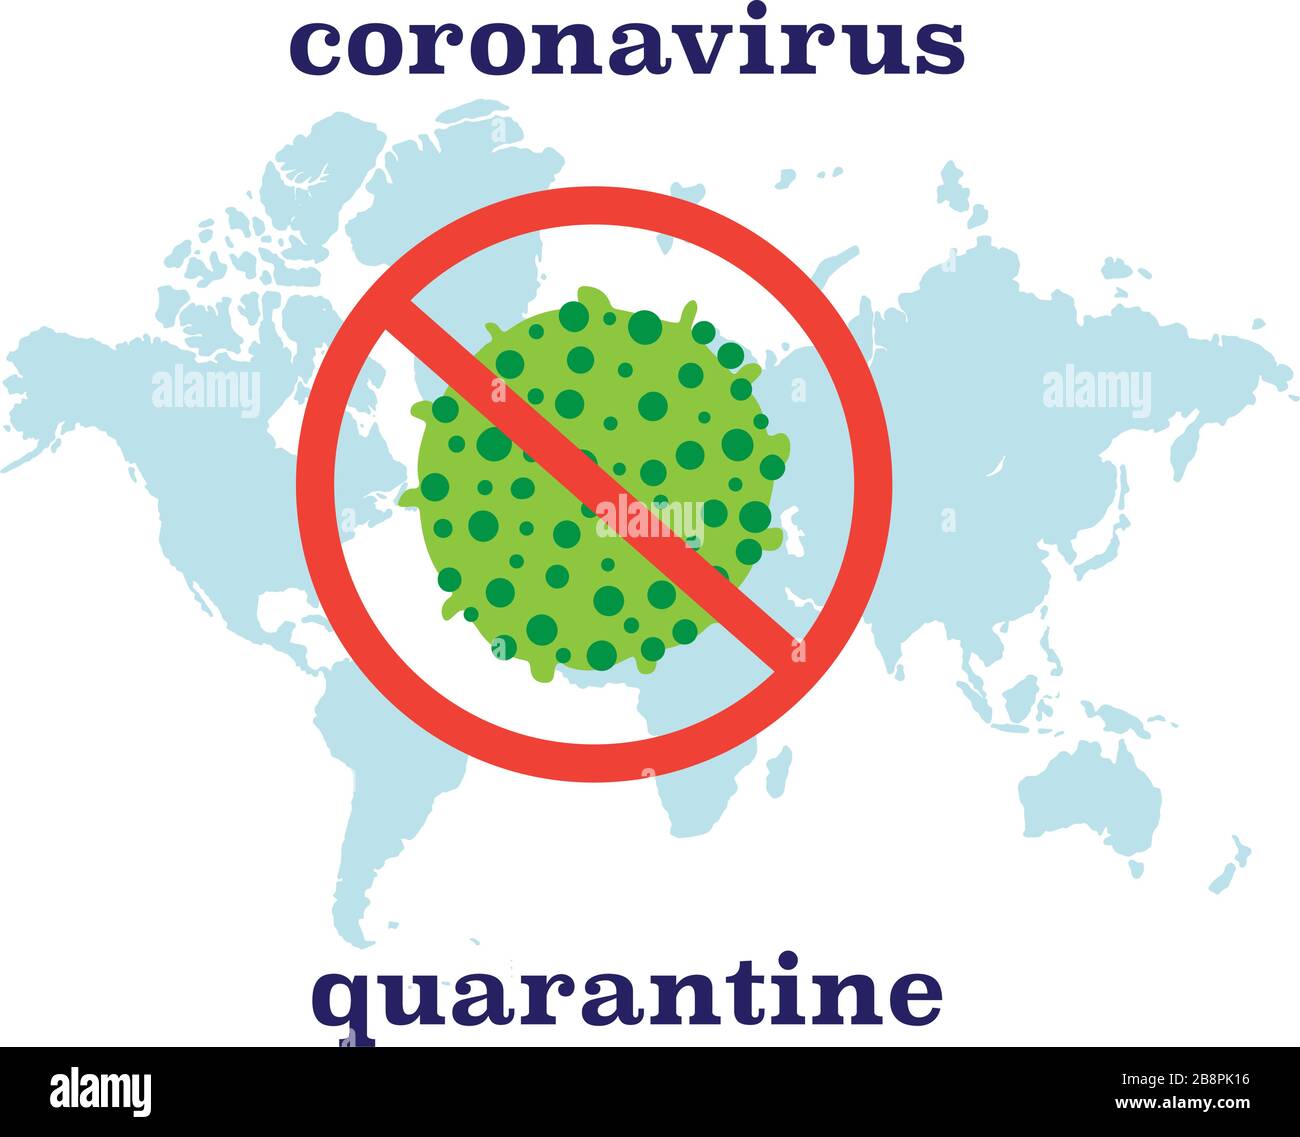 Map caution coronavirus travel alert concept 2019-nC0V outbreak. Stop pandemic COVID-19 microbe. The virus attacks the respiratory tract, infections medical health risk . Flat simple cartoon style Stock Vector